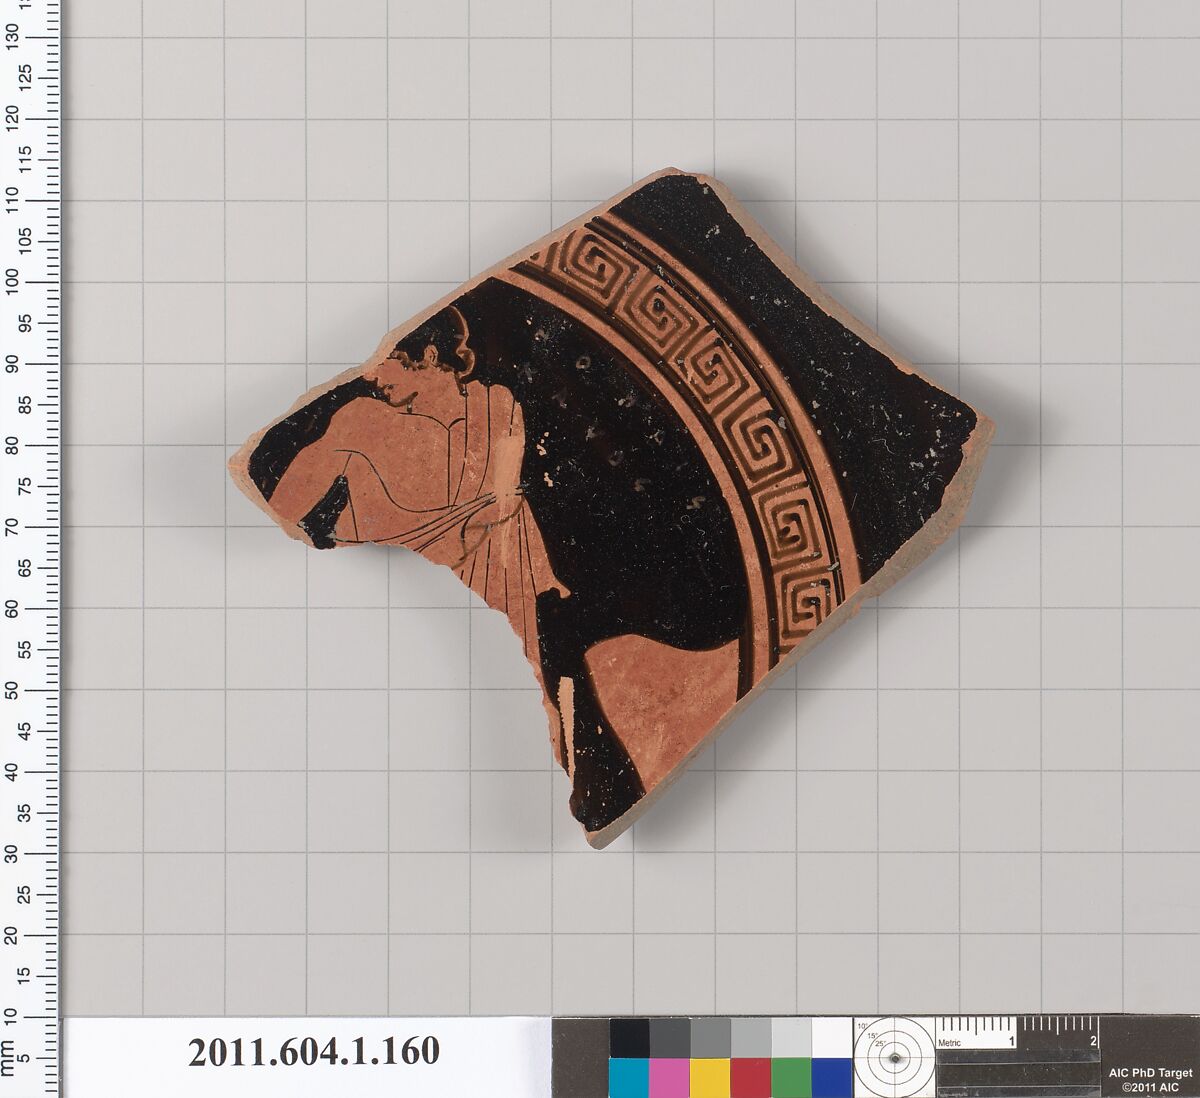 Terracotta fragment of a kylix (drinking cup), Attributed to the Penthesilea Painter [DvB], Terracotta, Greek, Attic 